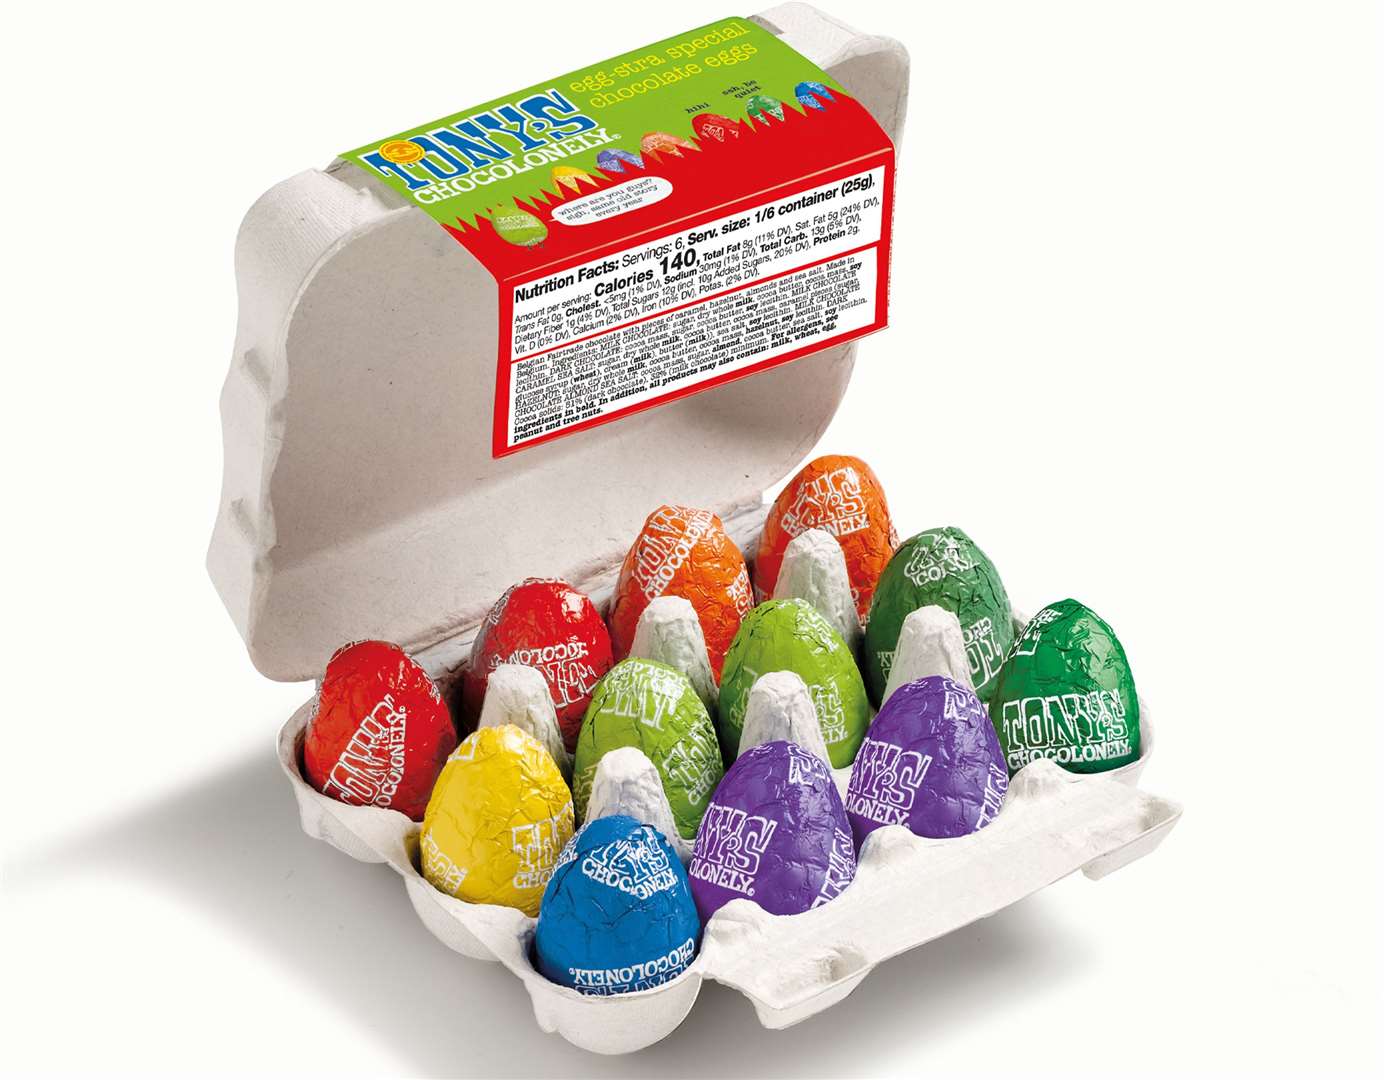 Egg-Stra Special Chocolate Eggs - £4.49 at Tony's Chocolonely